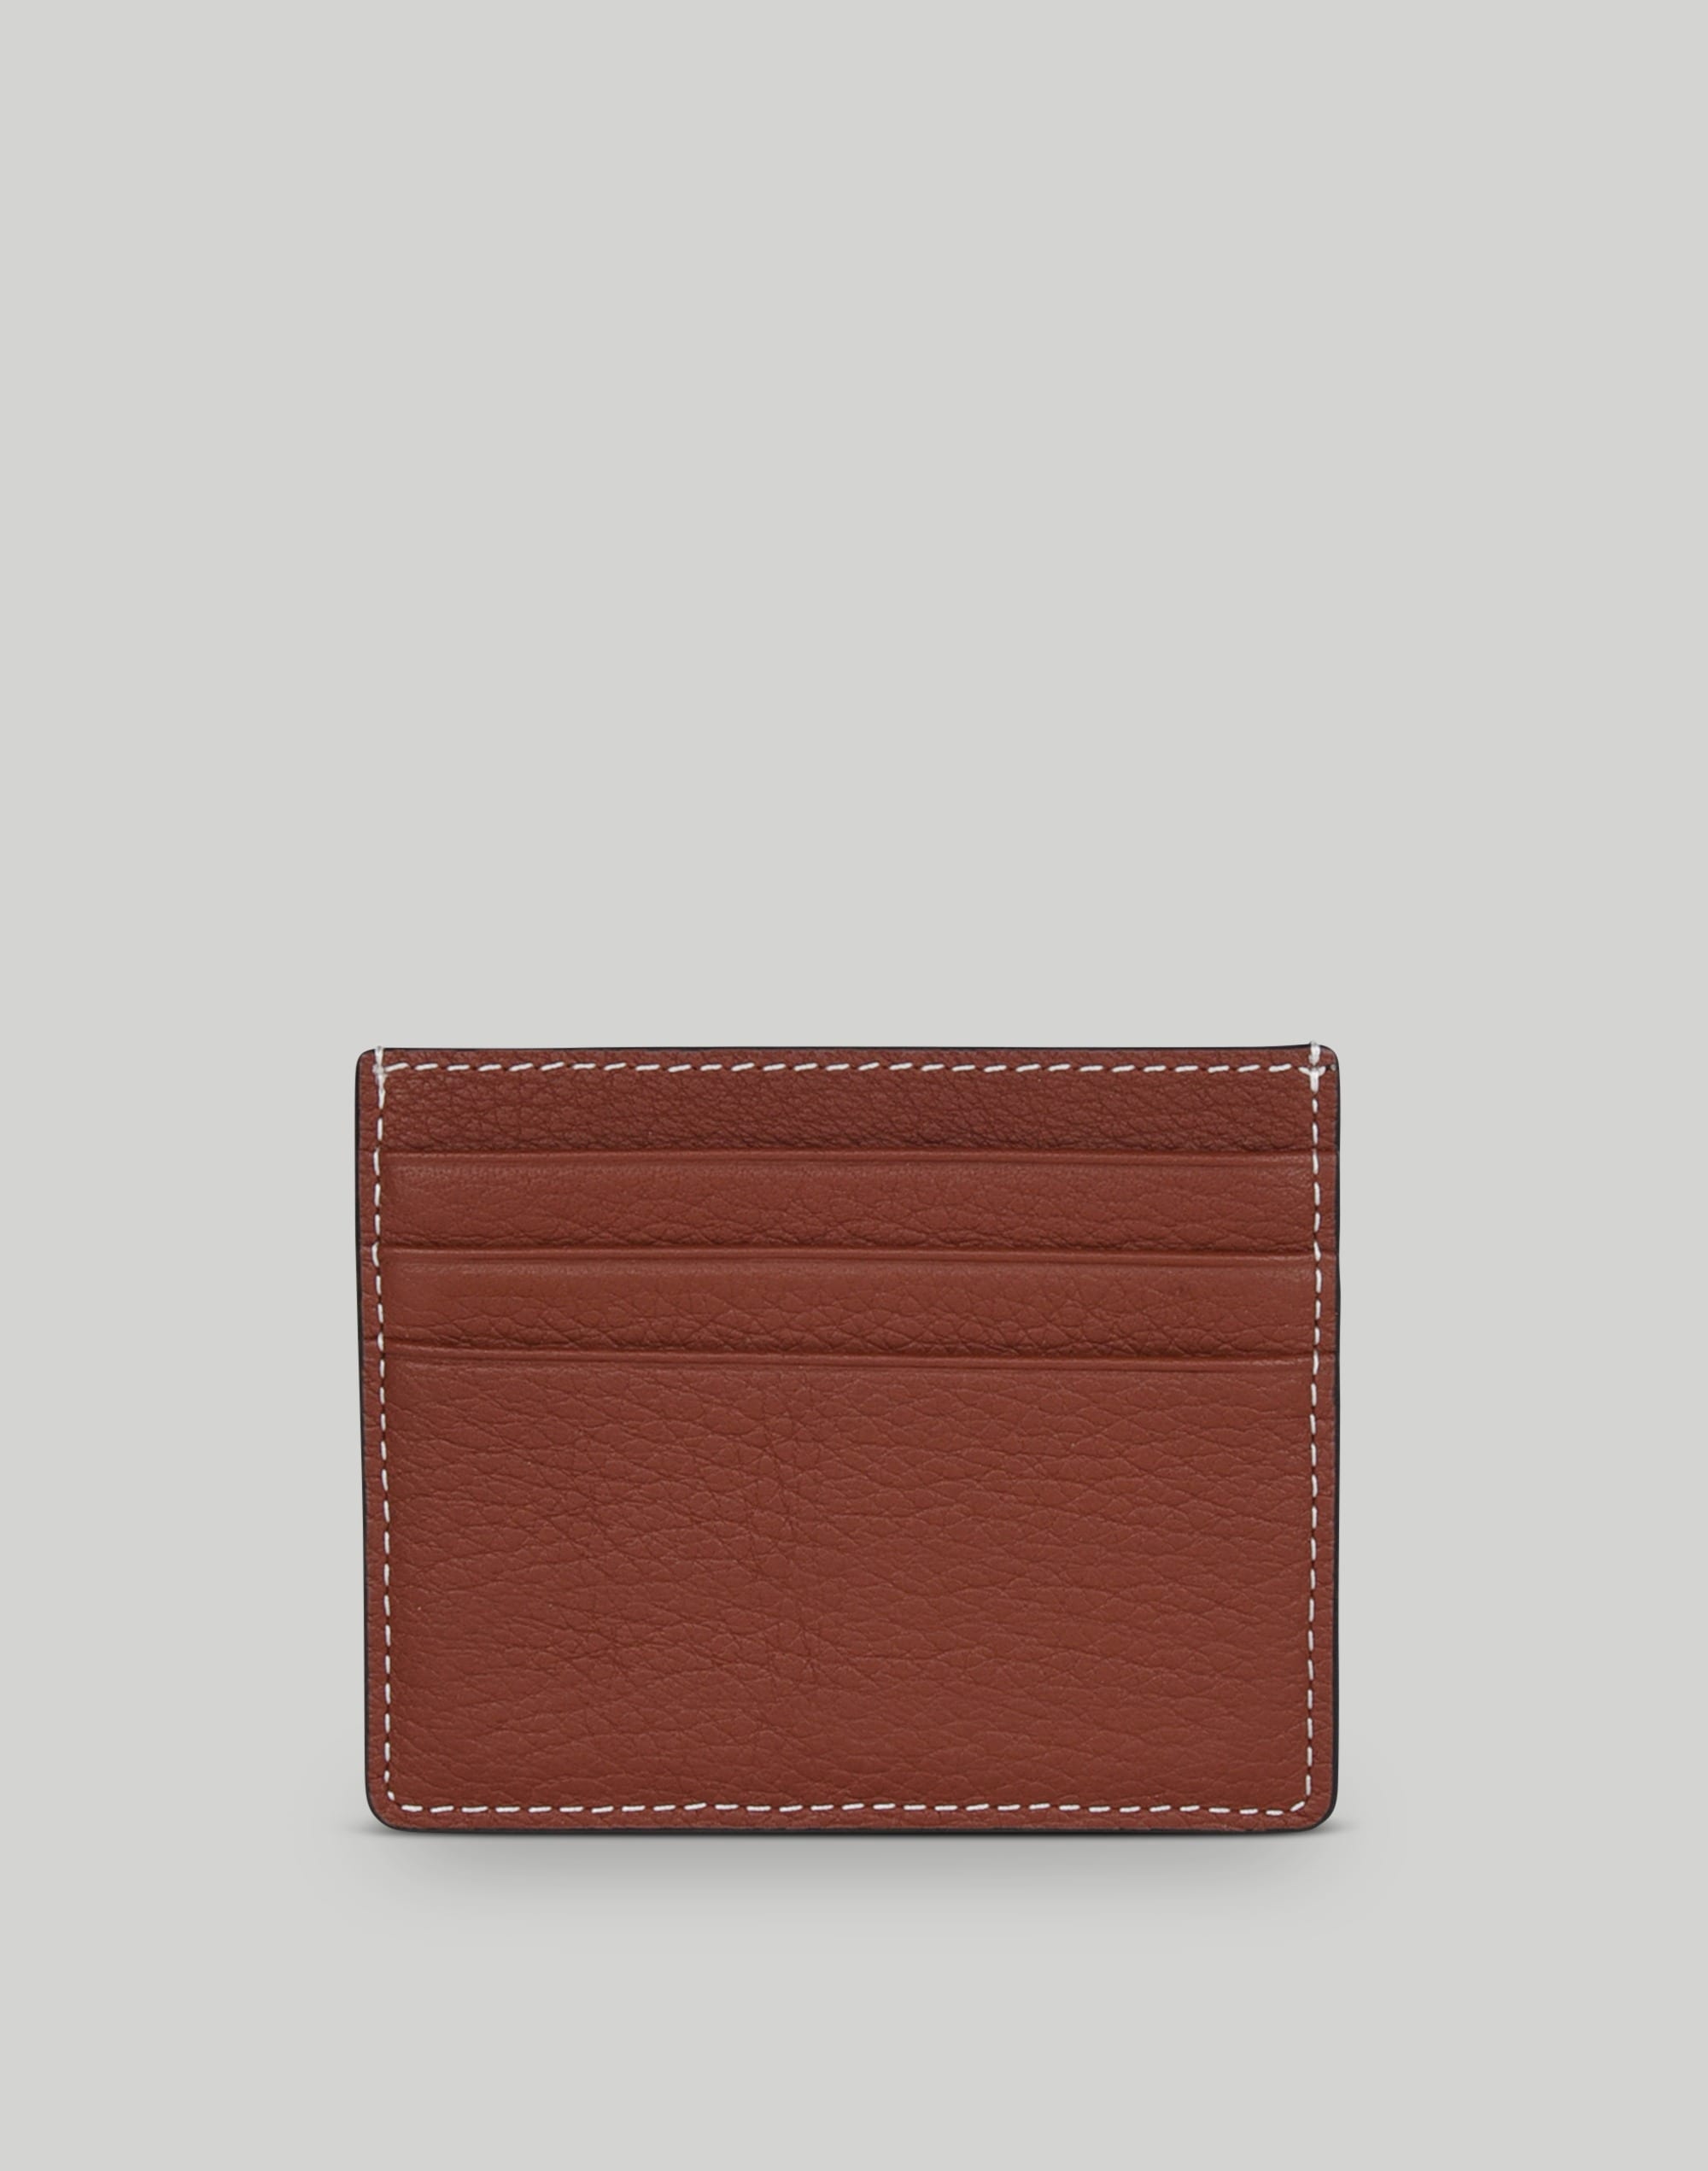 Mw Hyer Goods Luxe Card Wallet In Brown